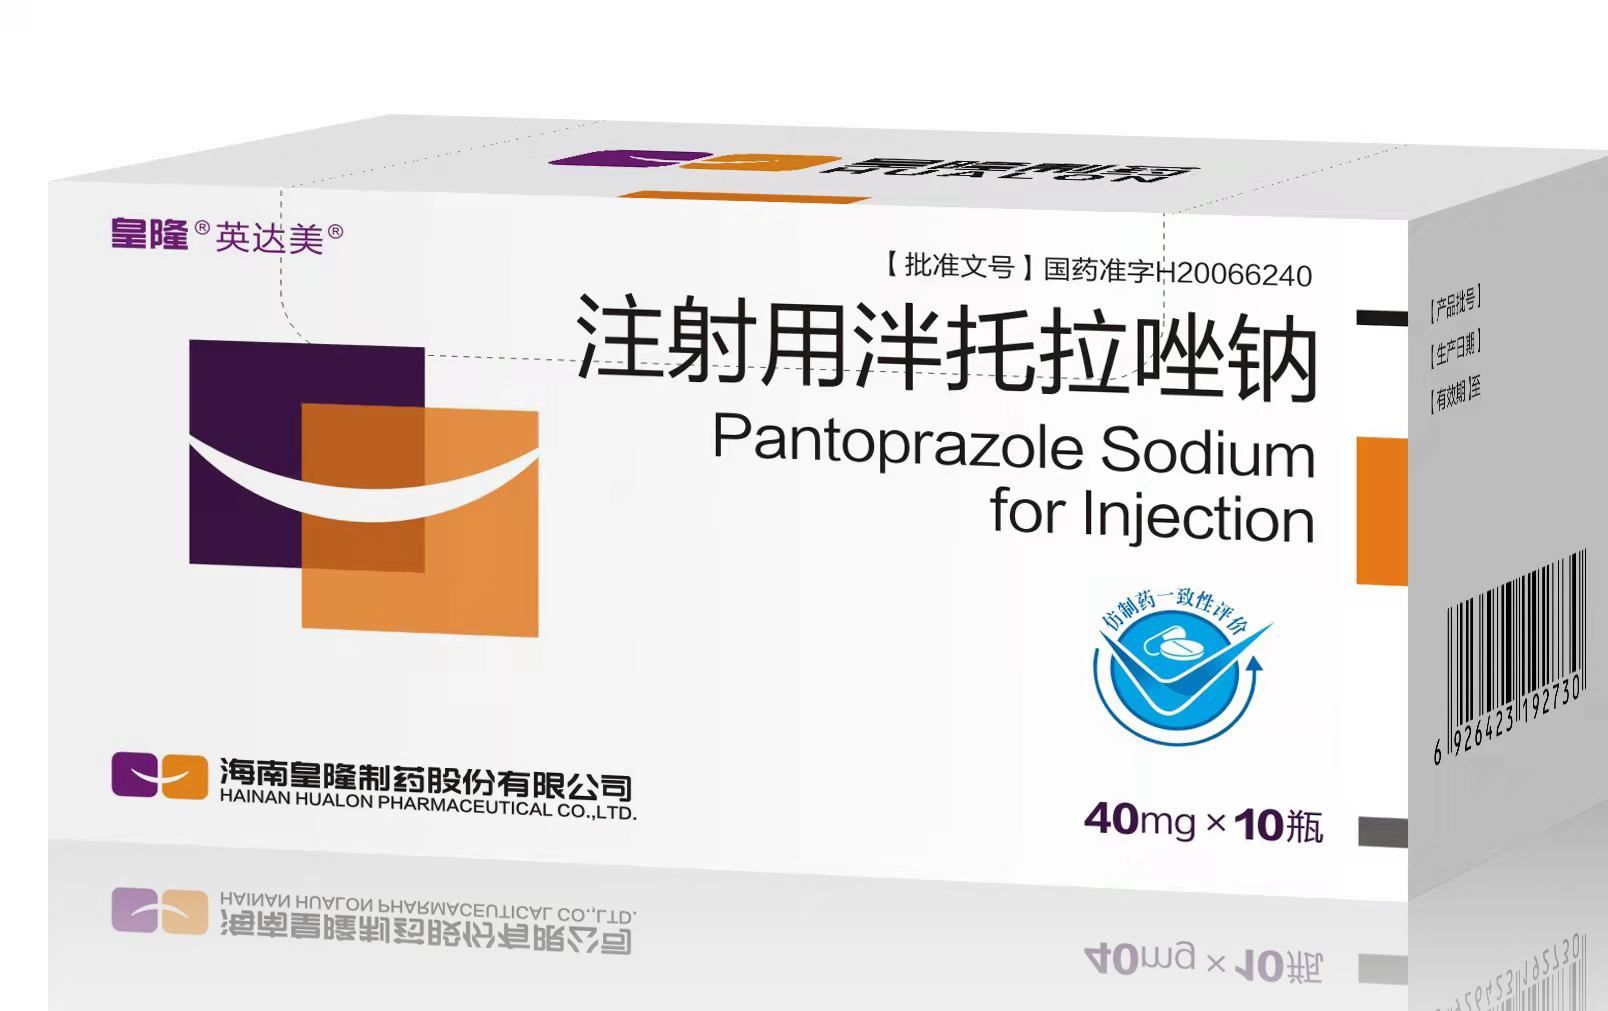 “Pantoprazole Sodium for Injection” passed the National Drug Consistency Evaluation